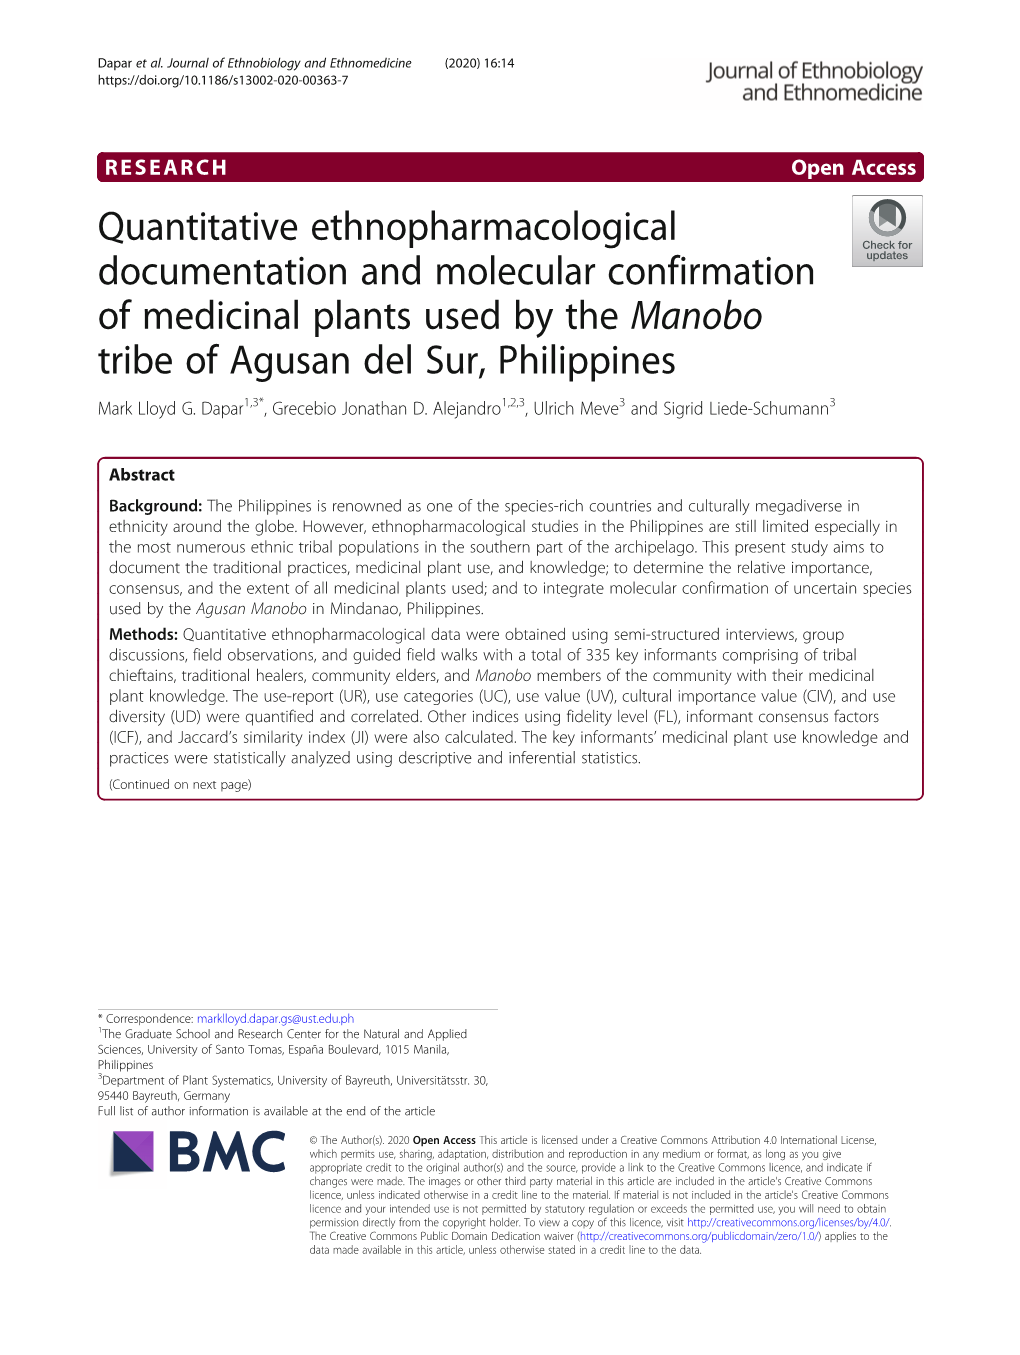 Quantitative Ethnopharmacological Documentation and Molecular Confirmation of Medicinal Plants Used by the Manobo Tribe of Agusan Del Sur, Philippines Mark Lloyd G